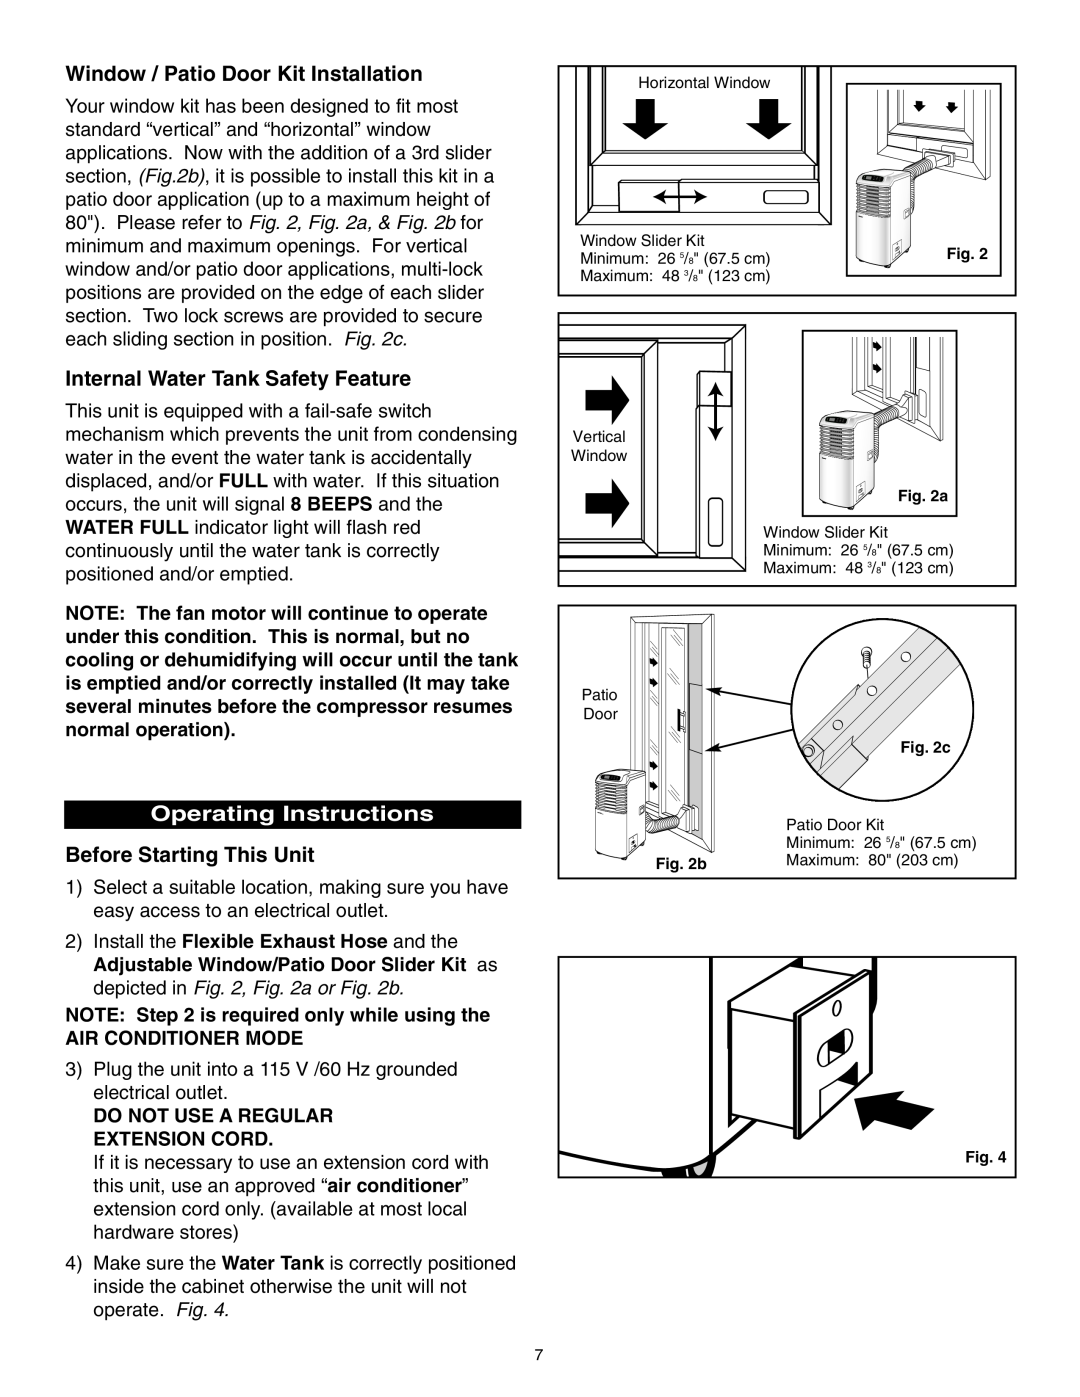 Danby SPAC8499 manual Window / Patio Door Kit Installation, Internal Water Tank Safety Feature, Operating Instructions 